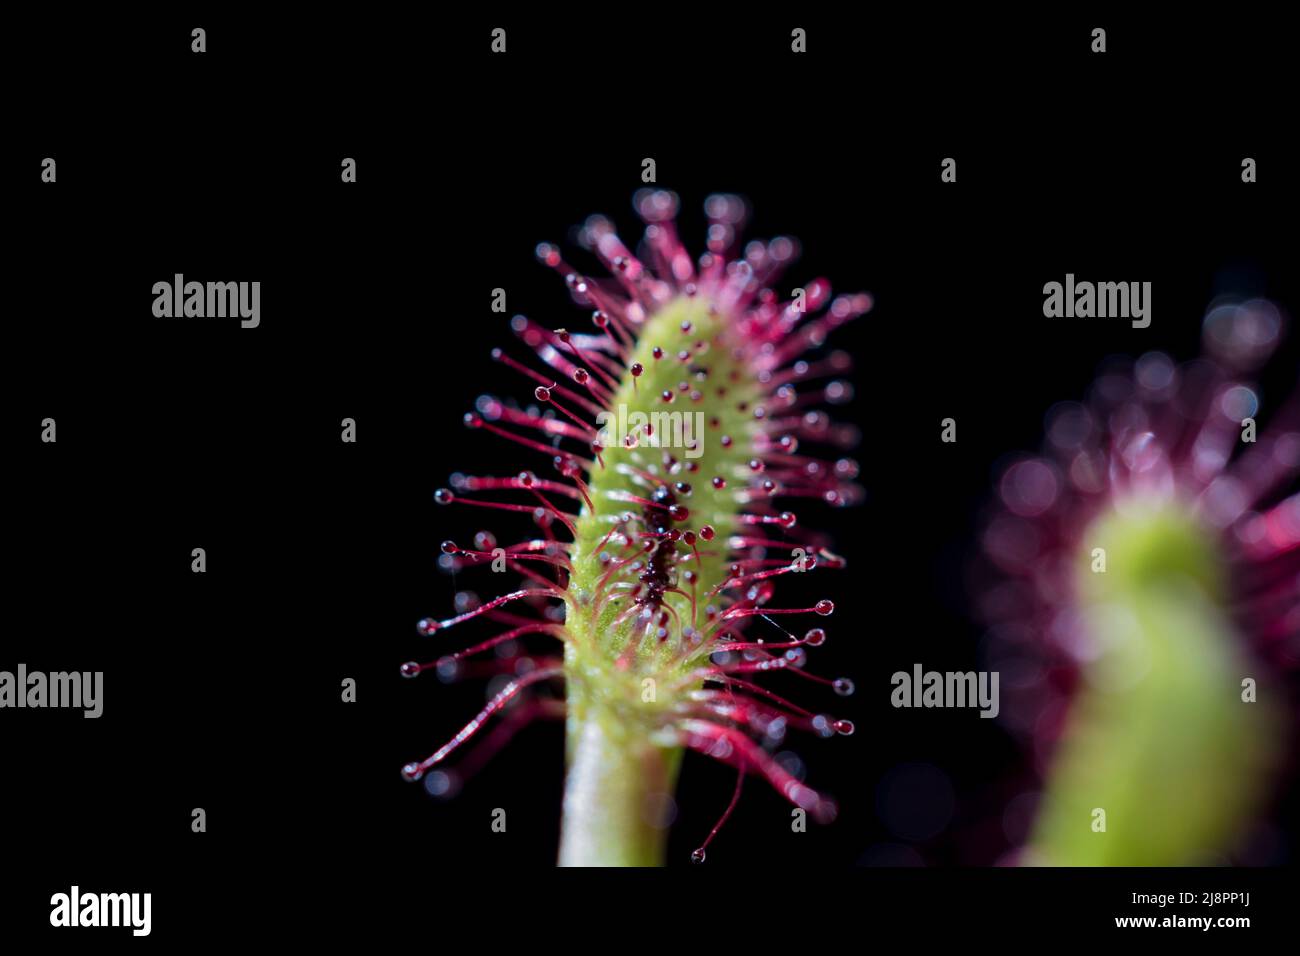 Carnivorous plant with sticky tentacles. Stock Photo